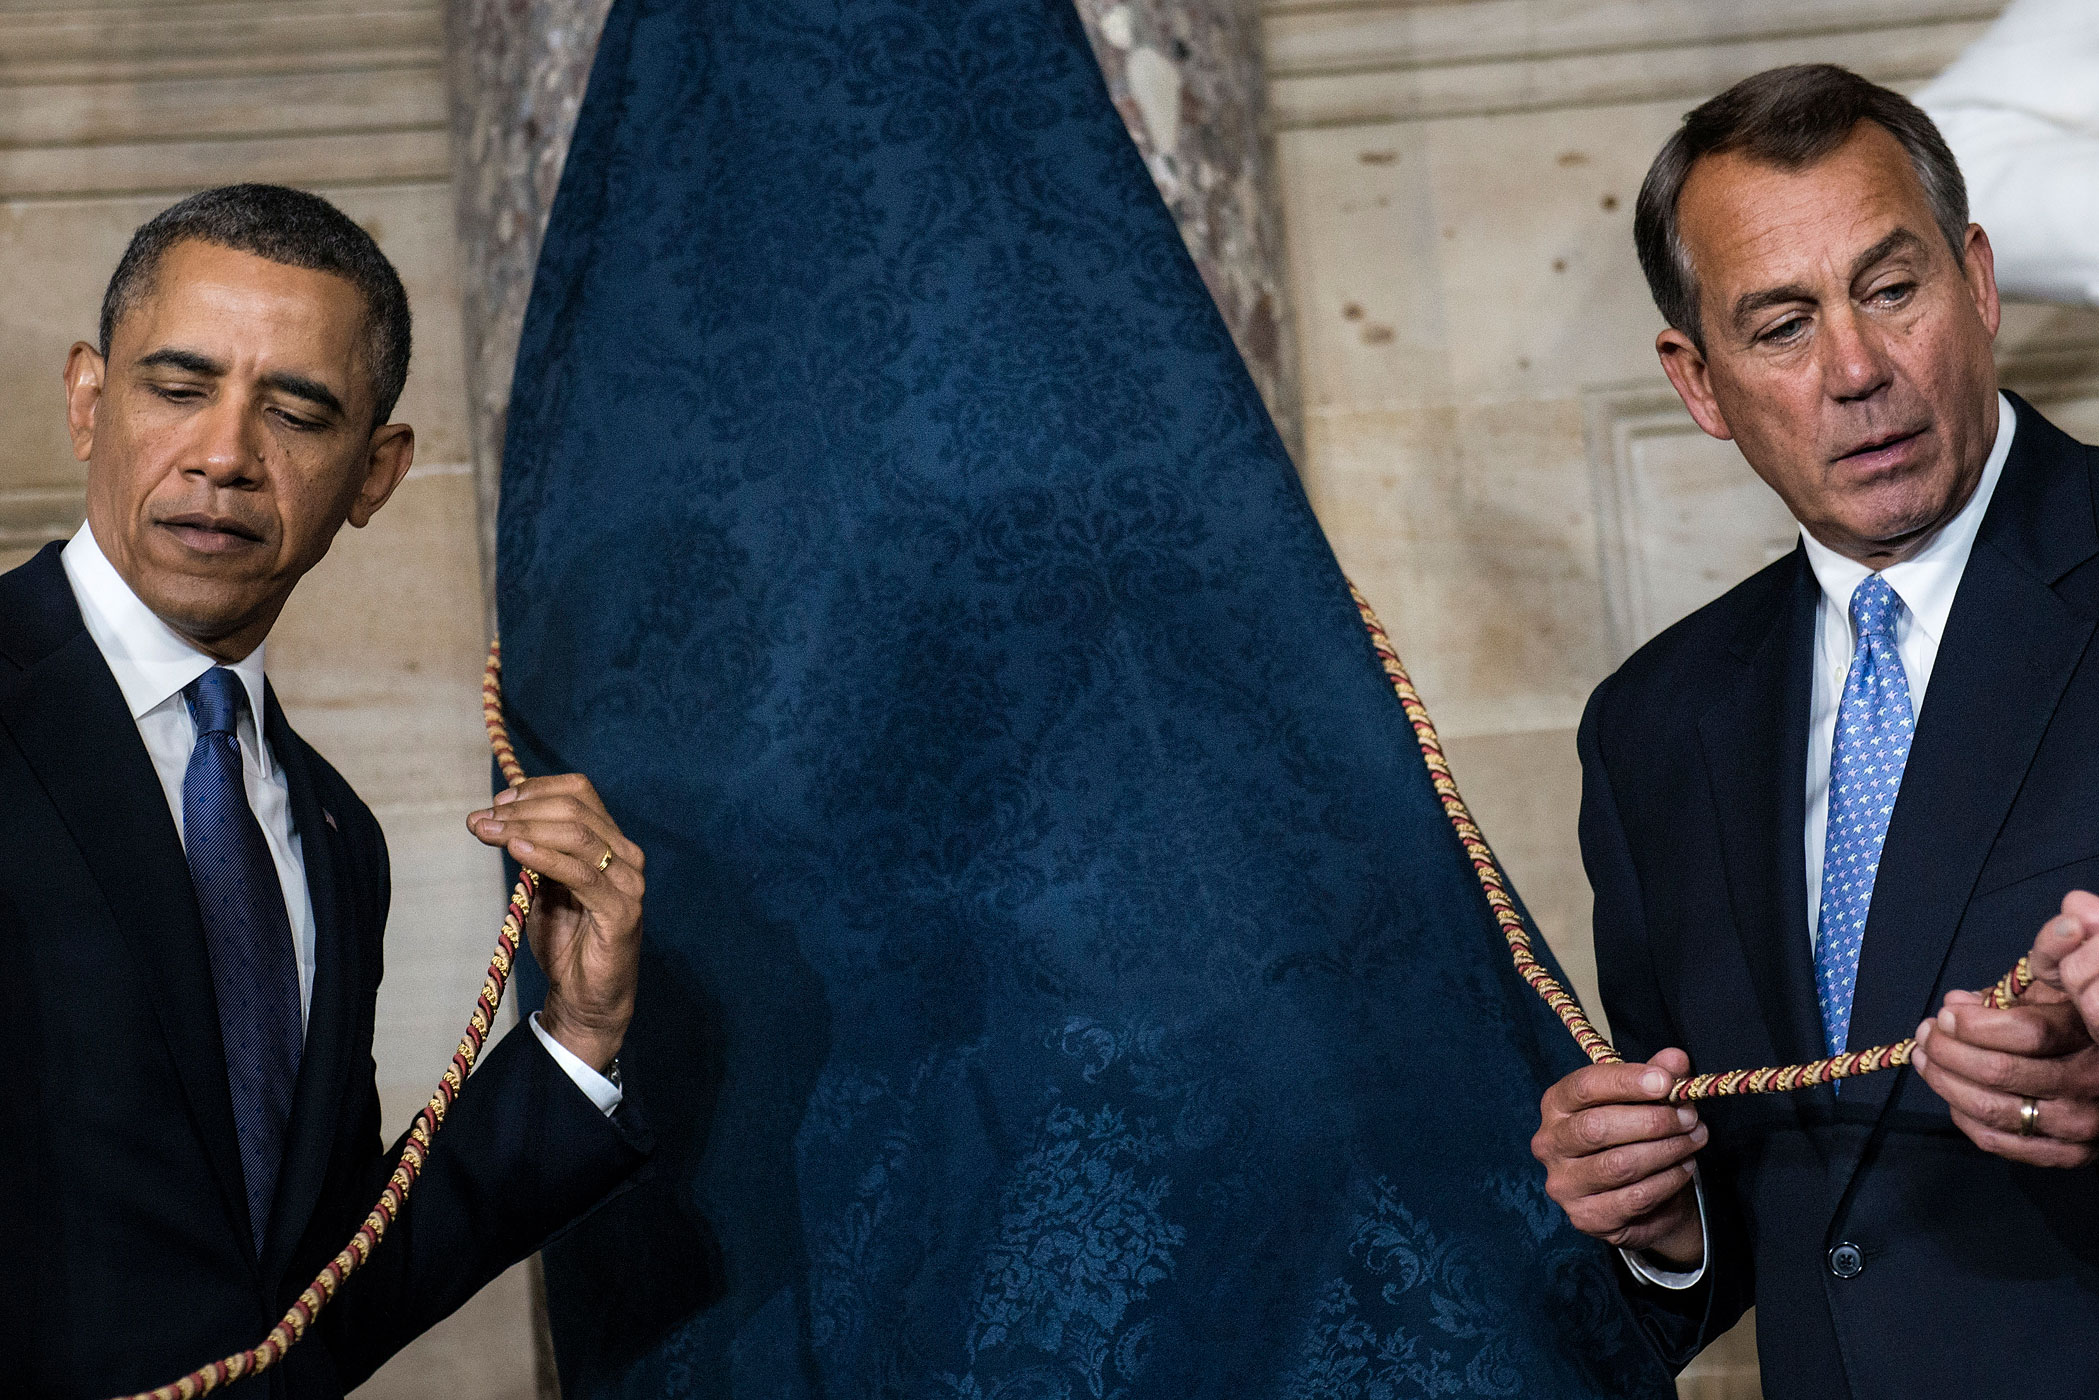 Feb. 27, 2013. President Barack Obama and Speaker of the House John Boehner wait to unveil a statue of Rosa Parks during an unveiling in Statuary Hall on Capitol Hill in Washington.